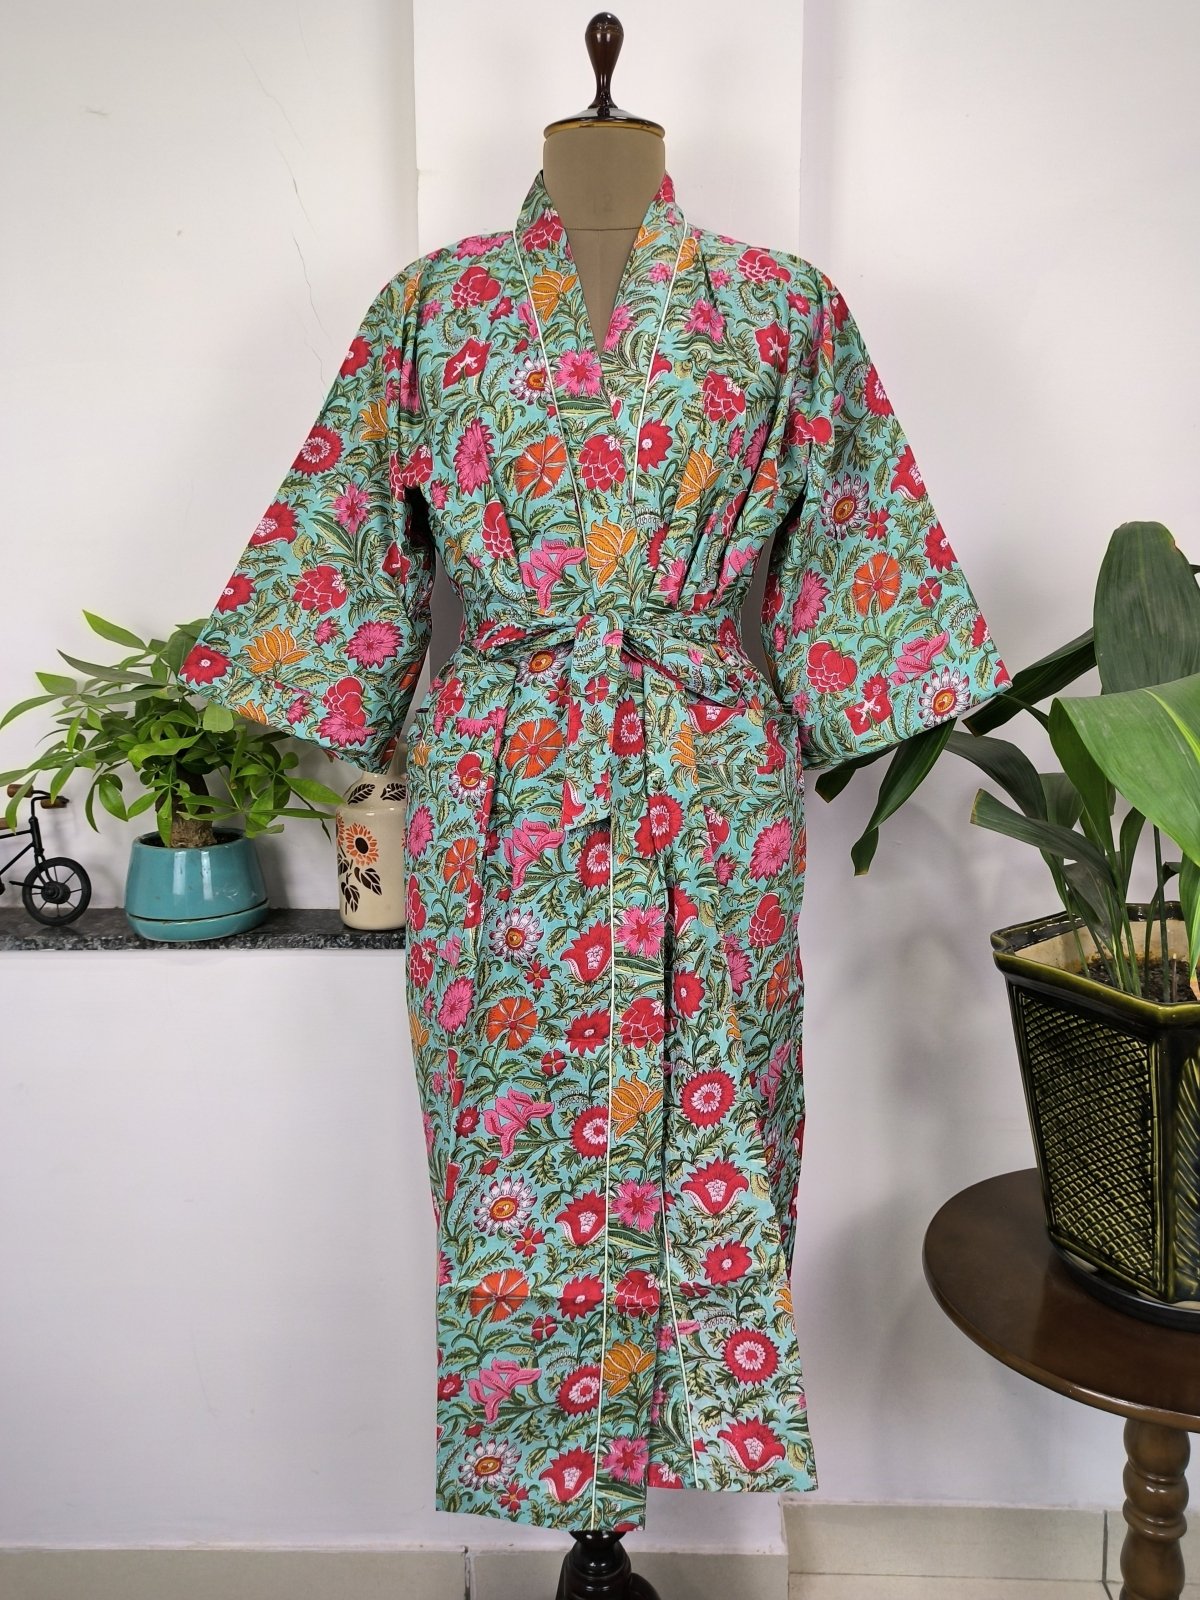 Pure Cotton Kimono Indian Handprinted Boho House Robe Summer Dress | Turquoise Pink Red Botanical Floral Luxury Beach Holiday Yacht Cover Up - The Eastern Loom